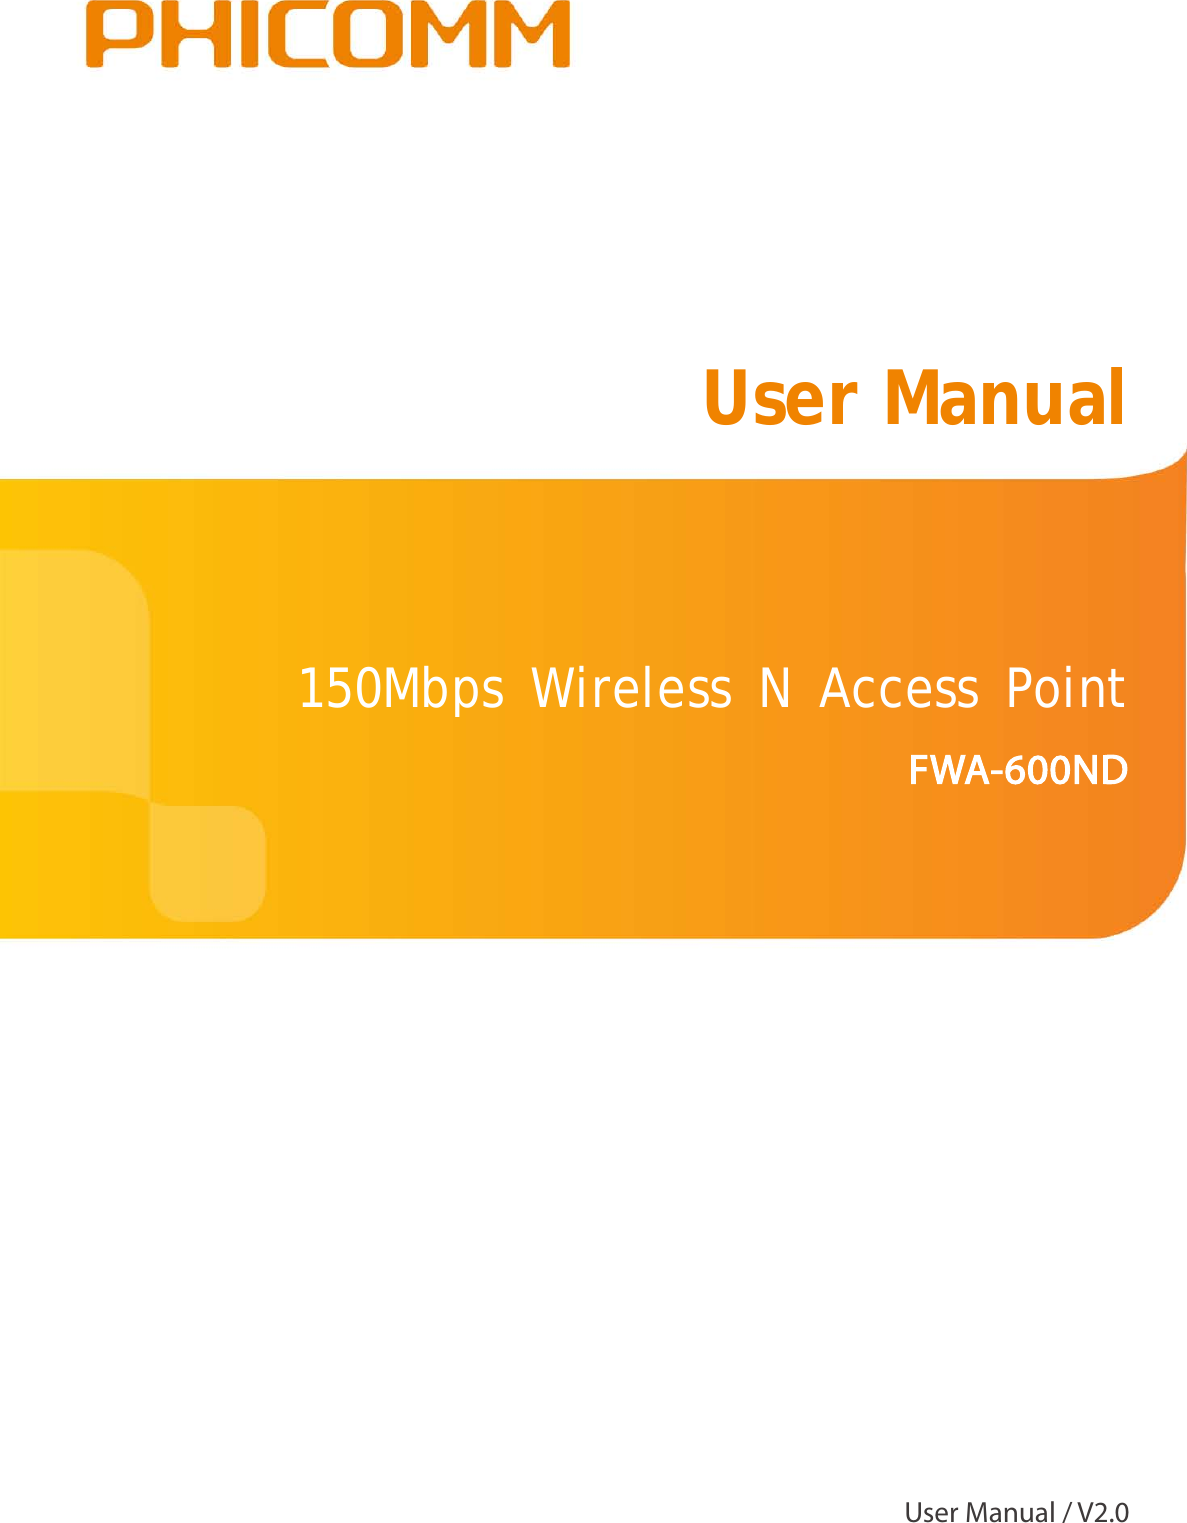                                                            150Mbps Wireless N Access Point  FWA-600ND  User Manual  User Manual / V2.0 